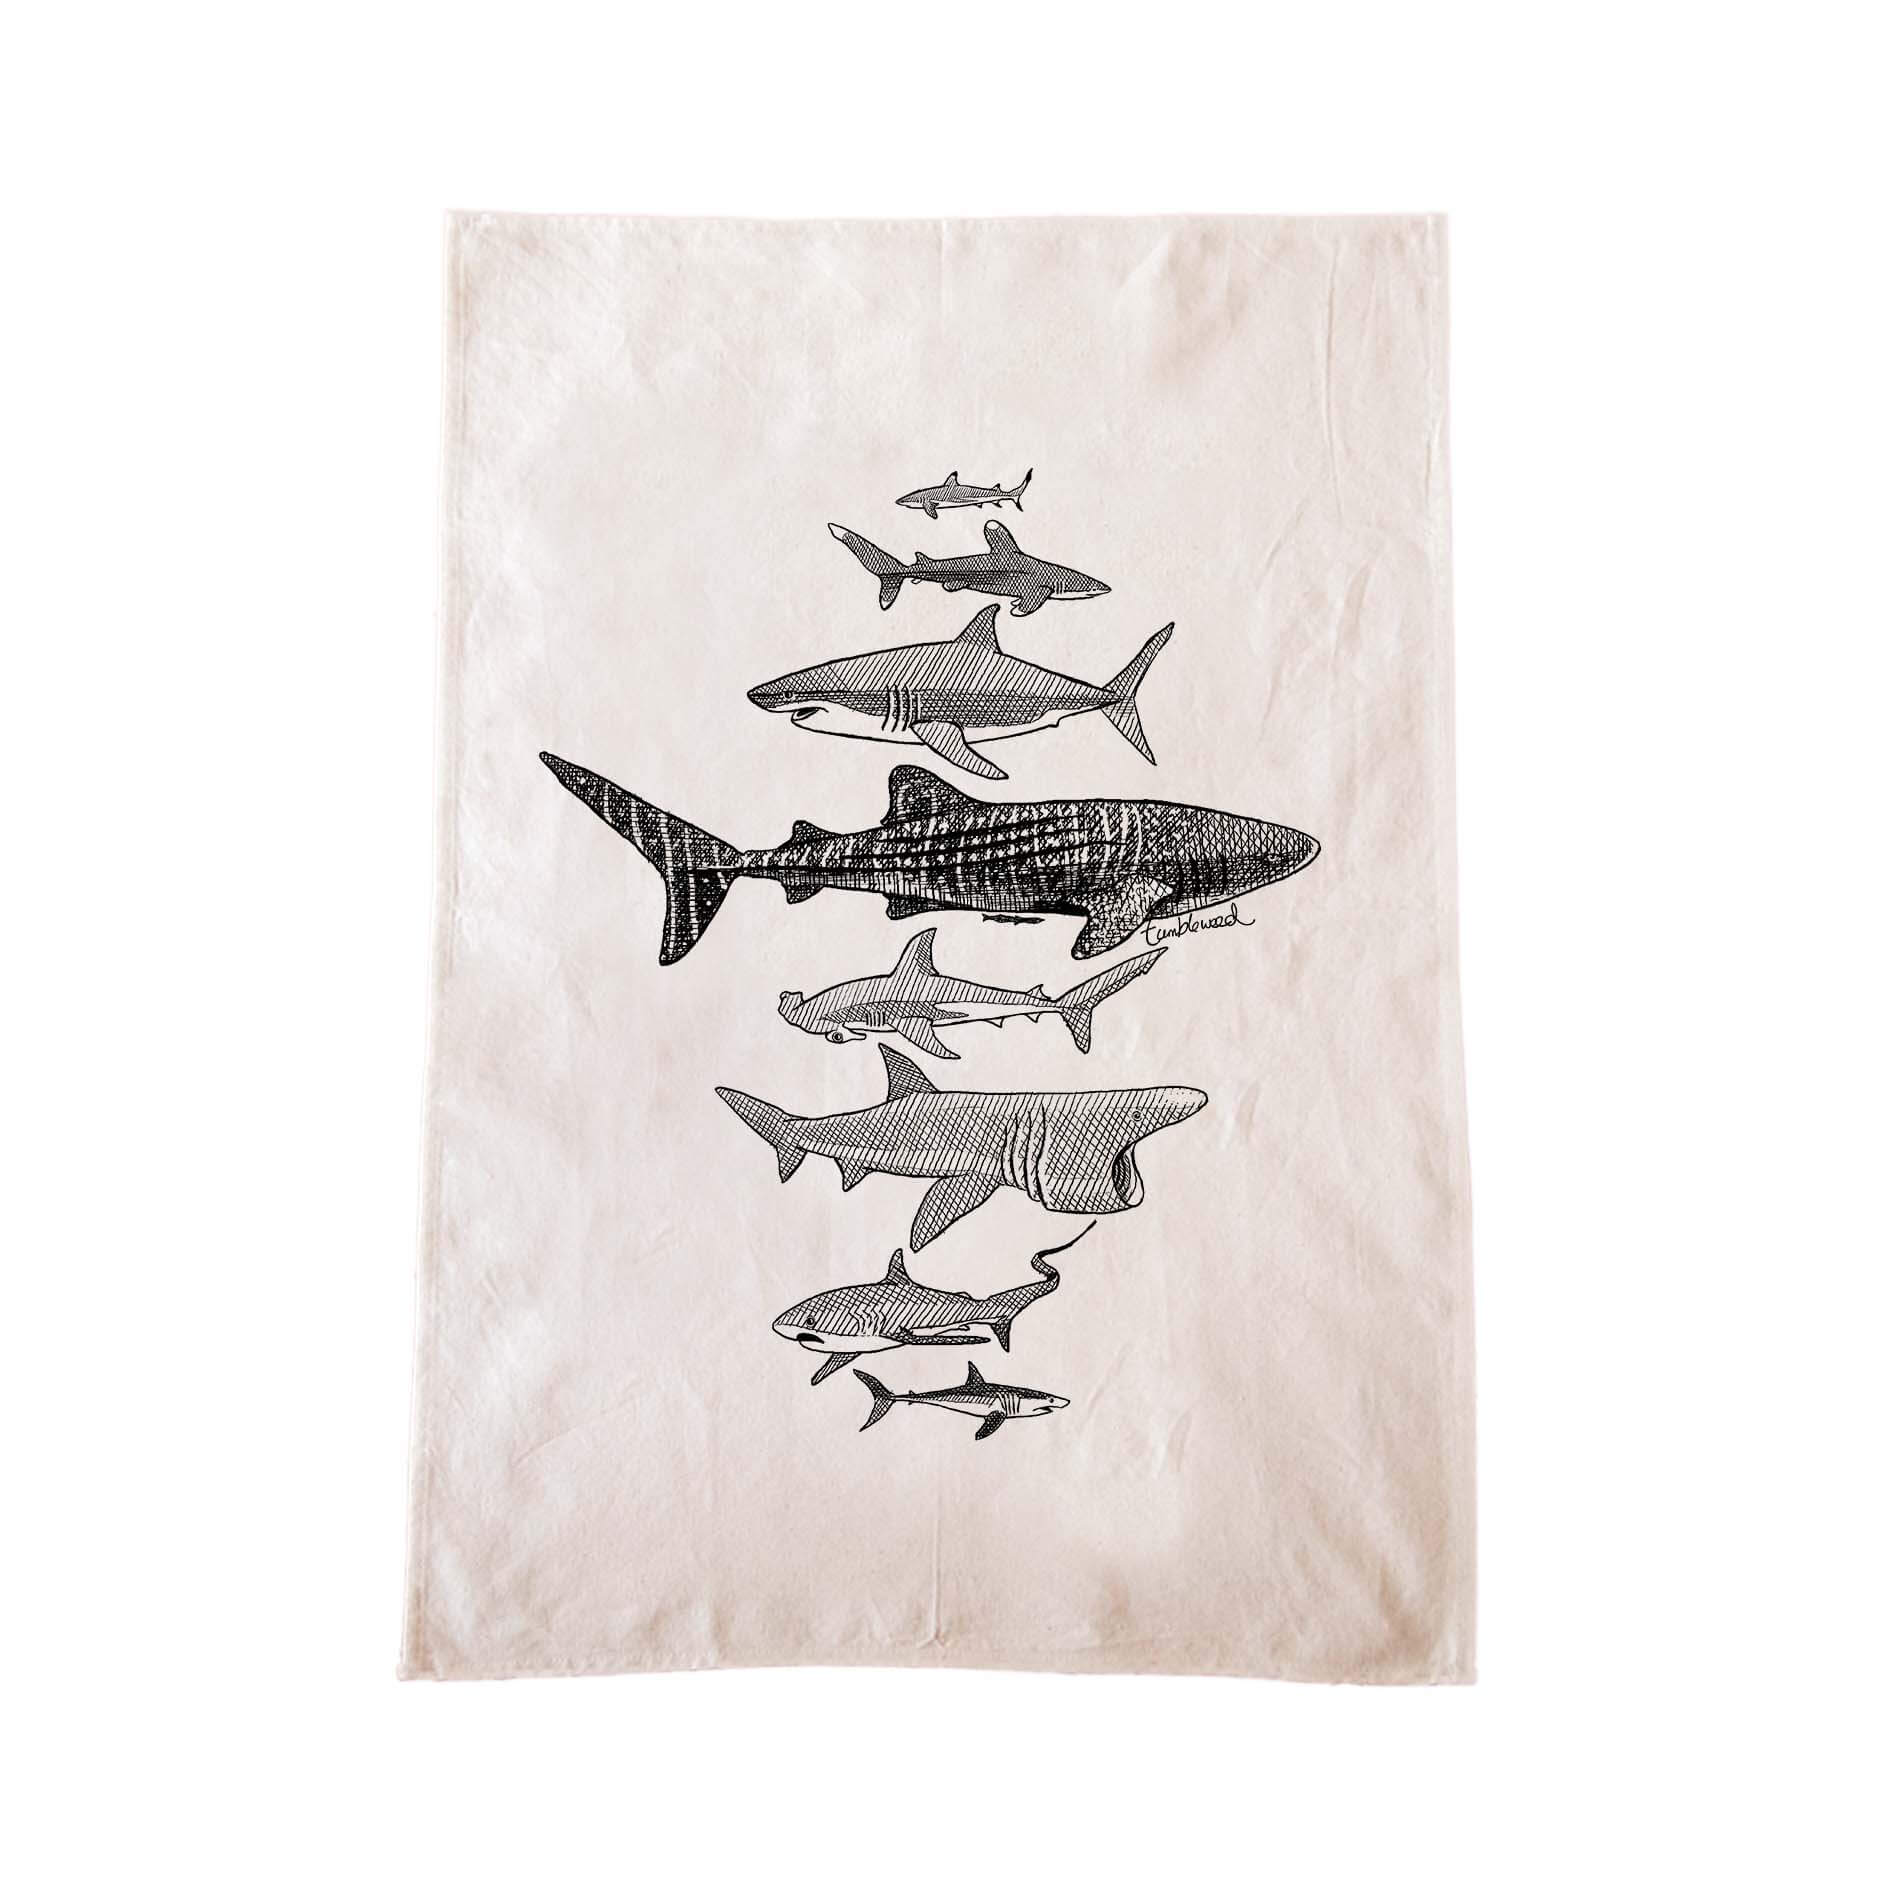 Off-white cotton tea towel with a screen printed Sharks design.